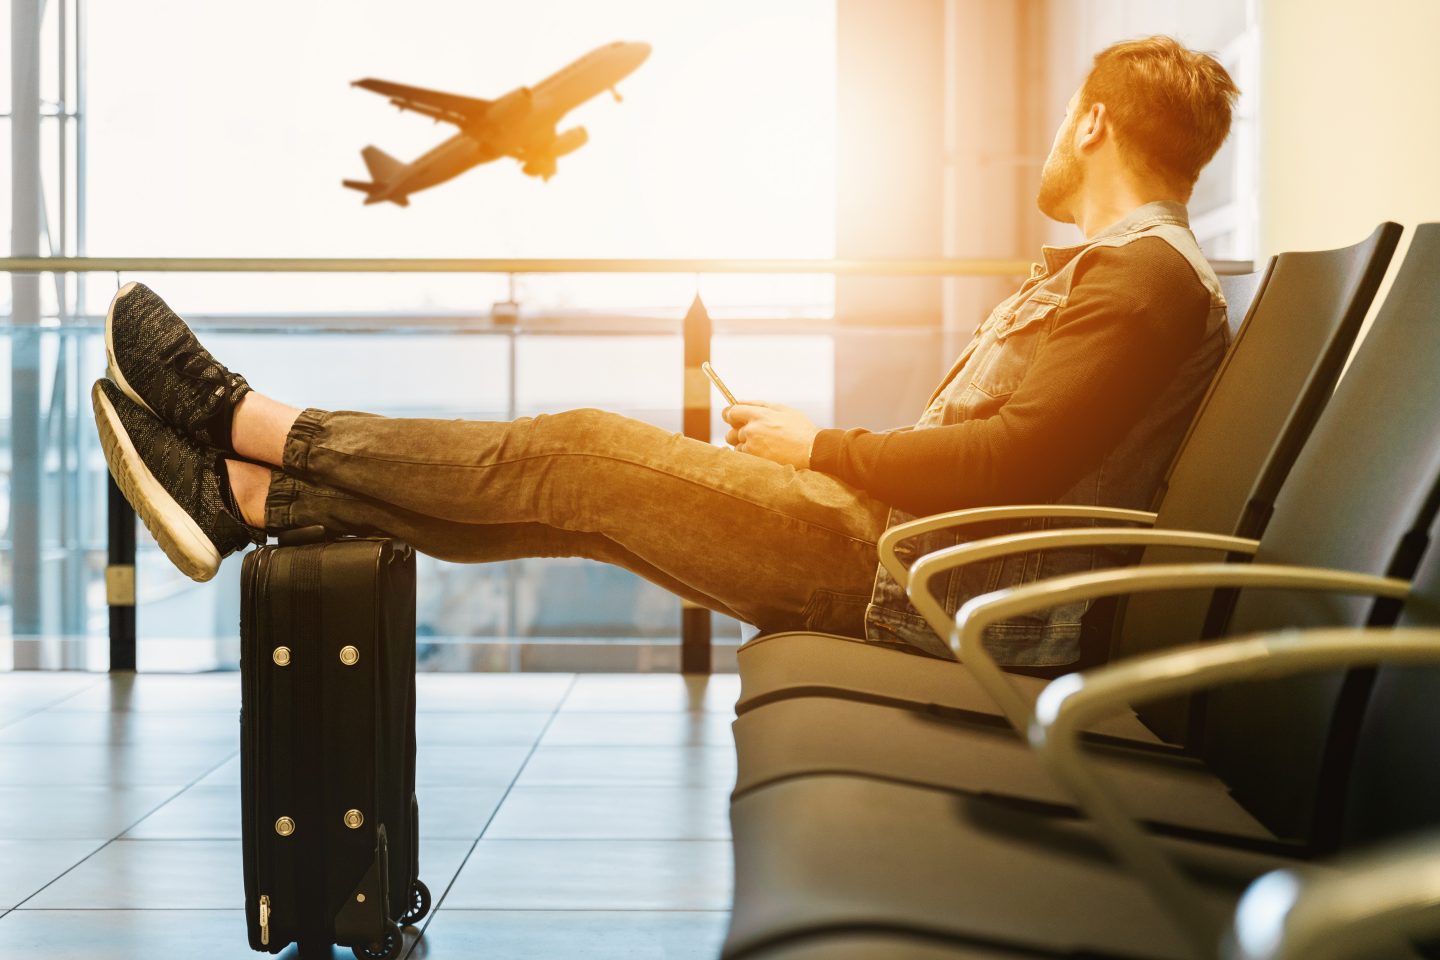 An image of a man with his suitcase and an aeroplane